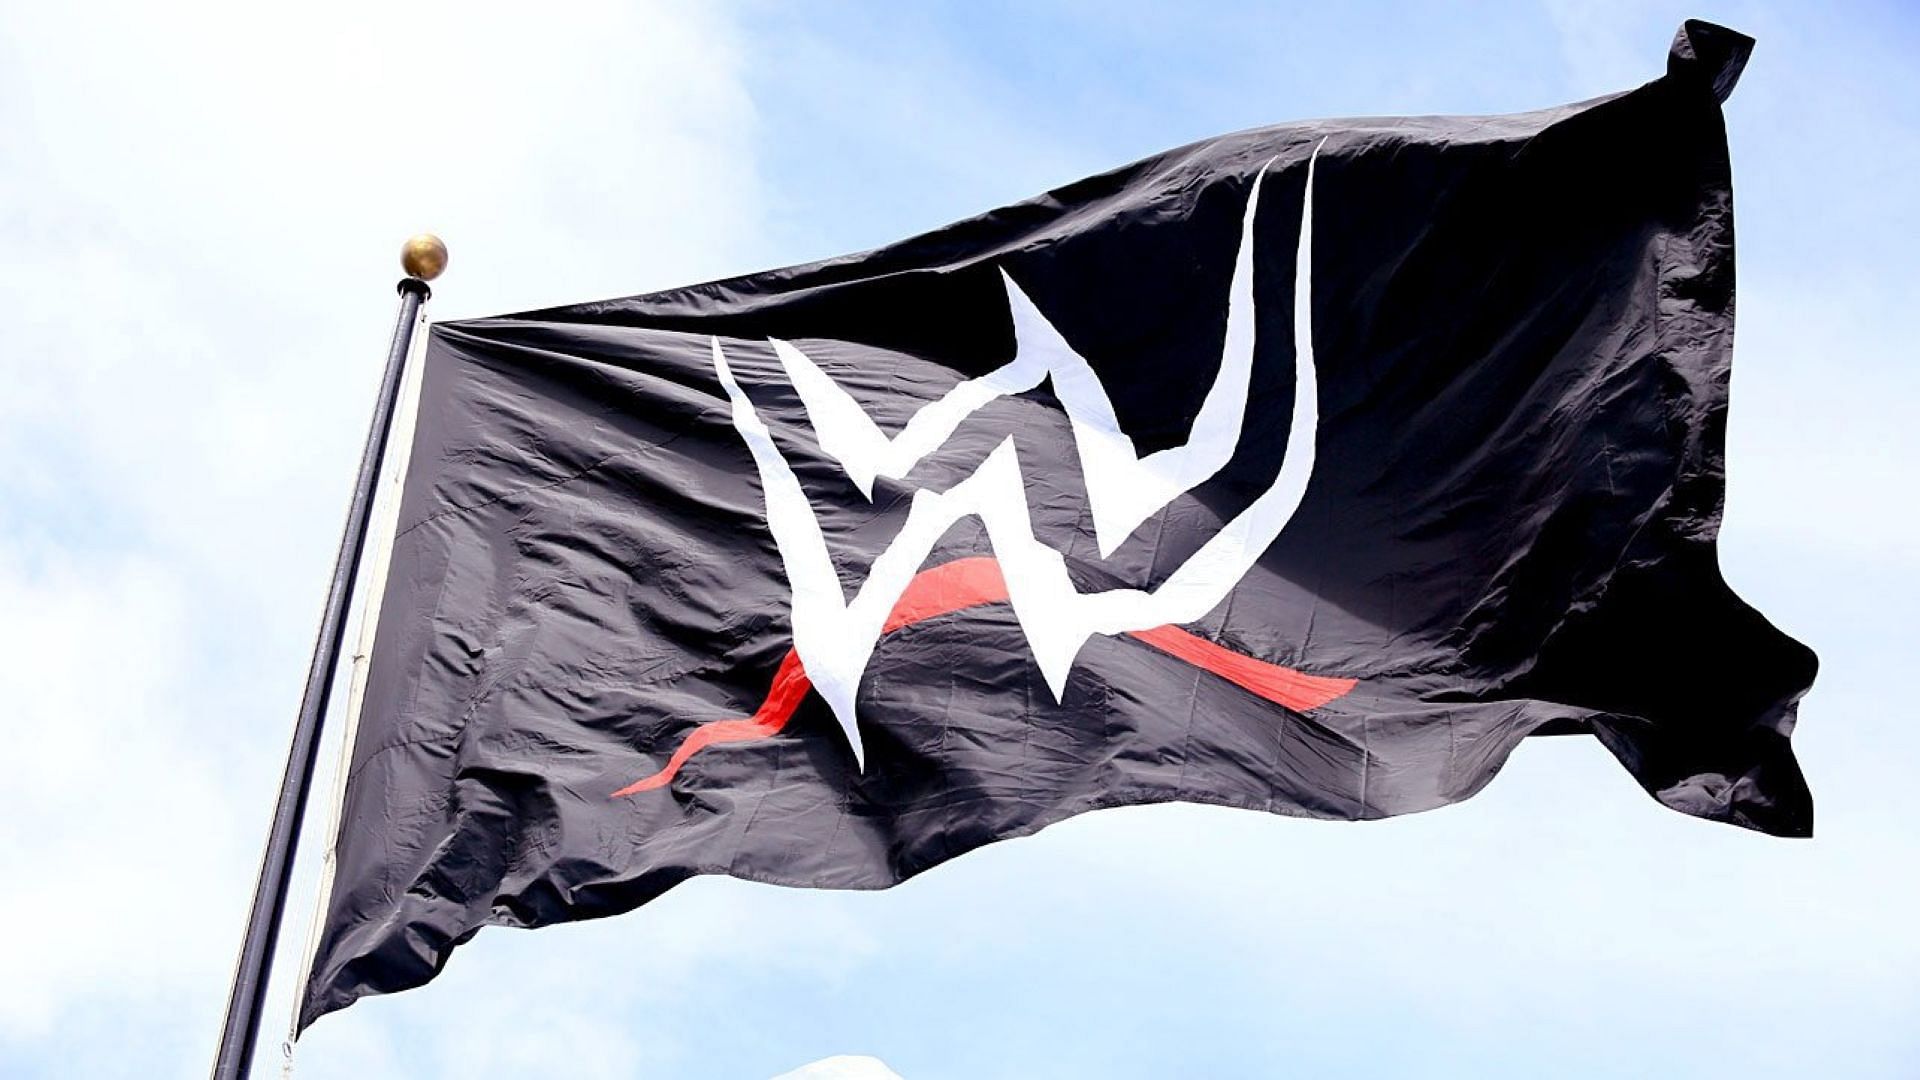 The official WWE logo on a flag at company HQ in Stamford, CT